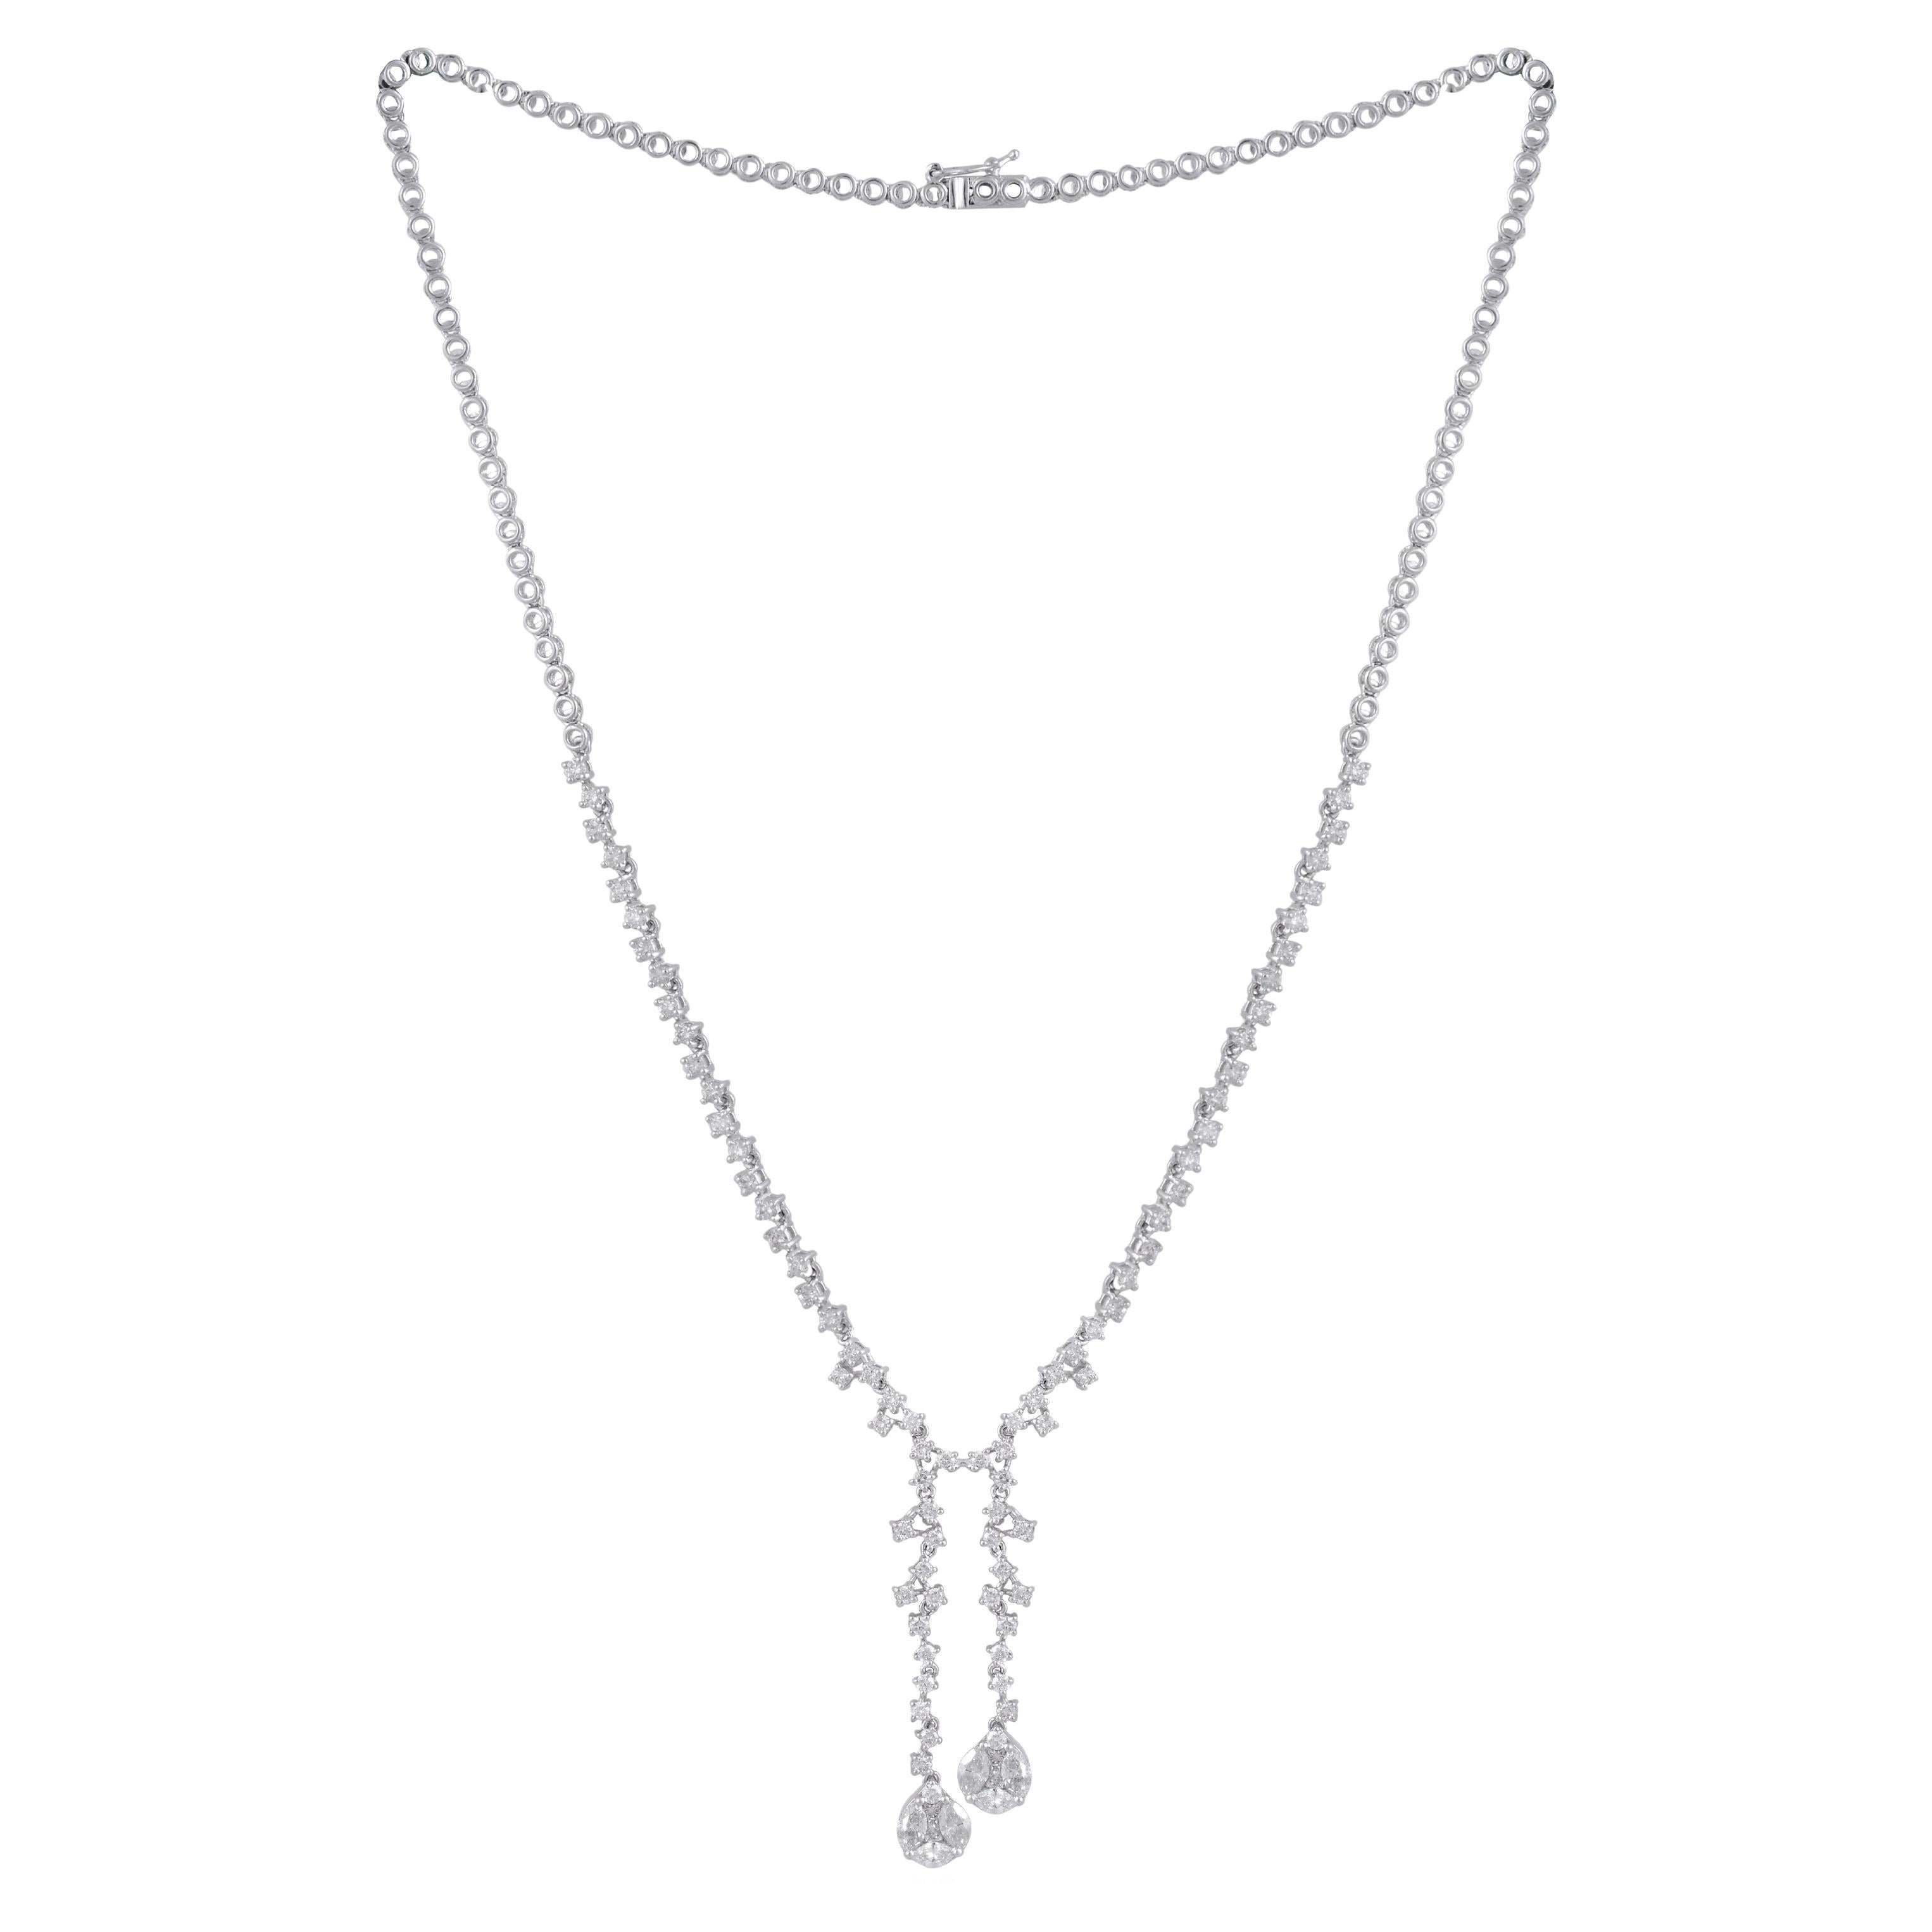 4.10 Ct SI Clarity HI Color Marquise Diamond Lariat Necklace 18 Karat White Gold For Sale